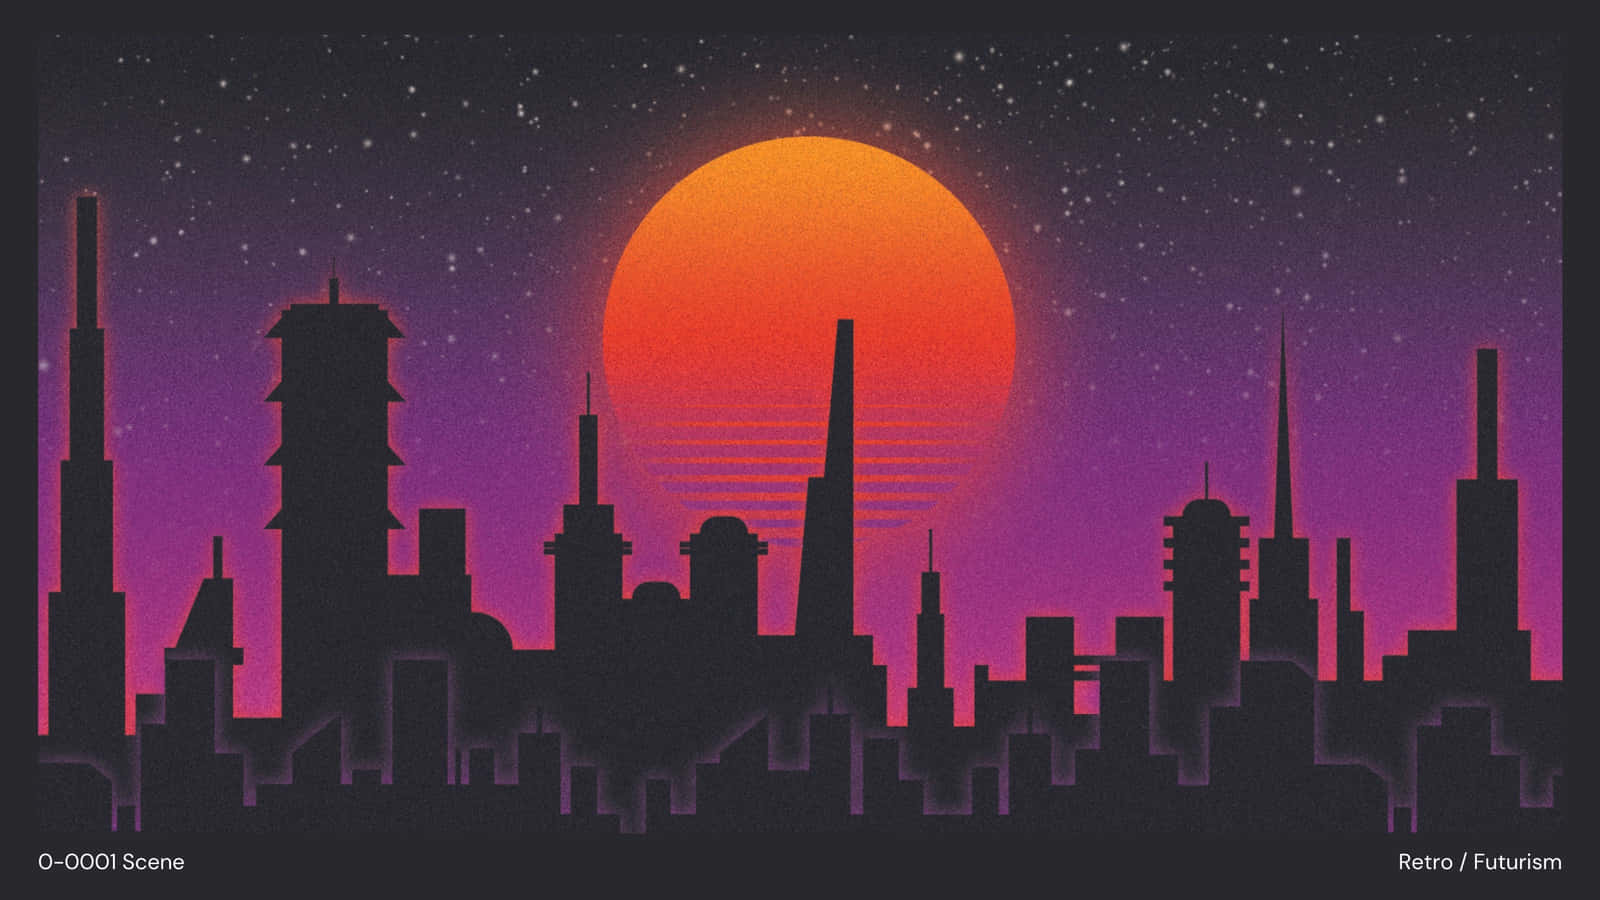 "A childhood dream coming to life in a dark retro style" Wallpaper